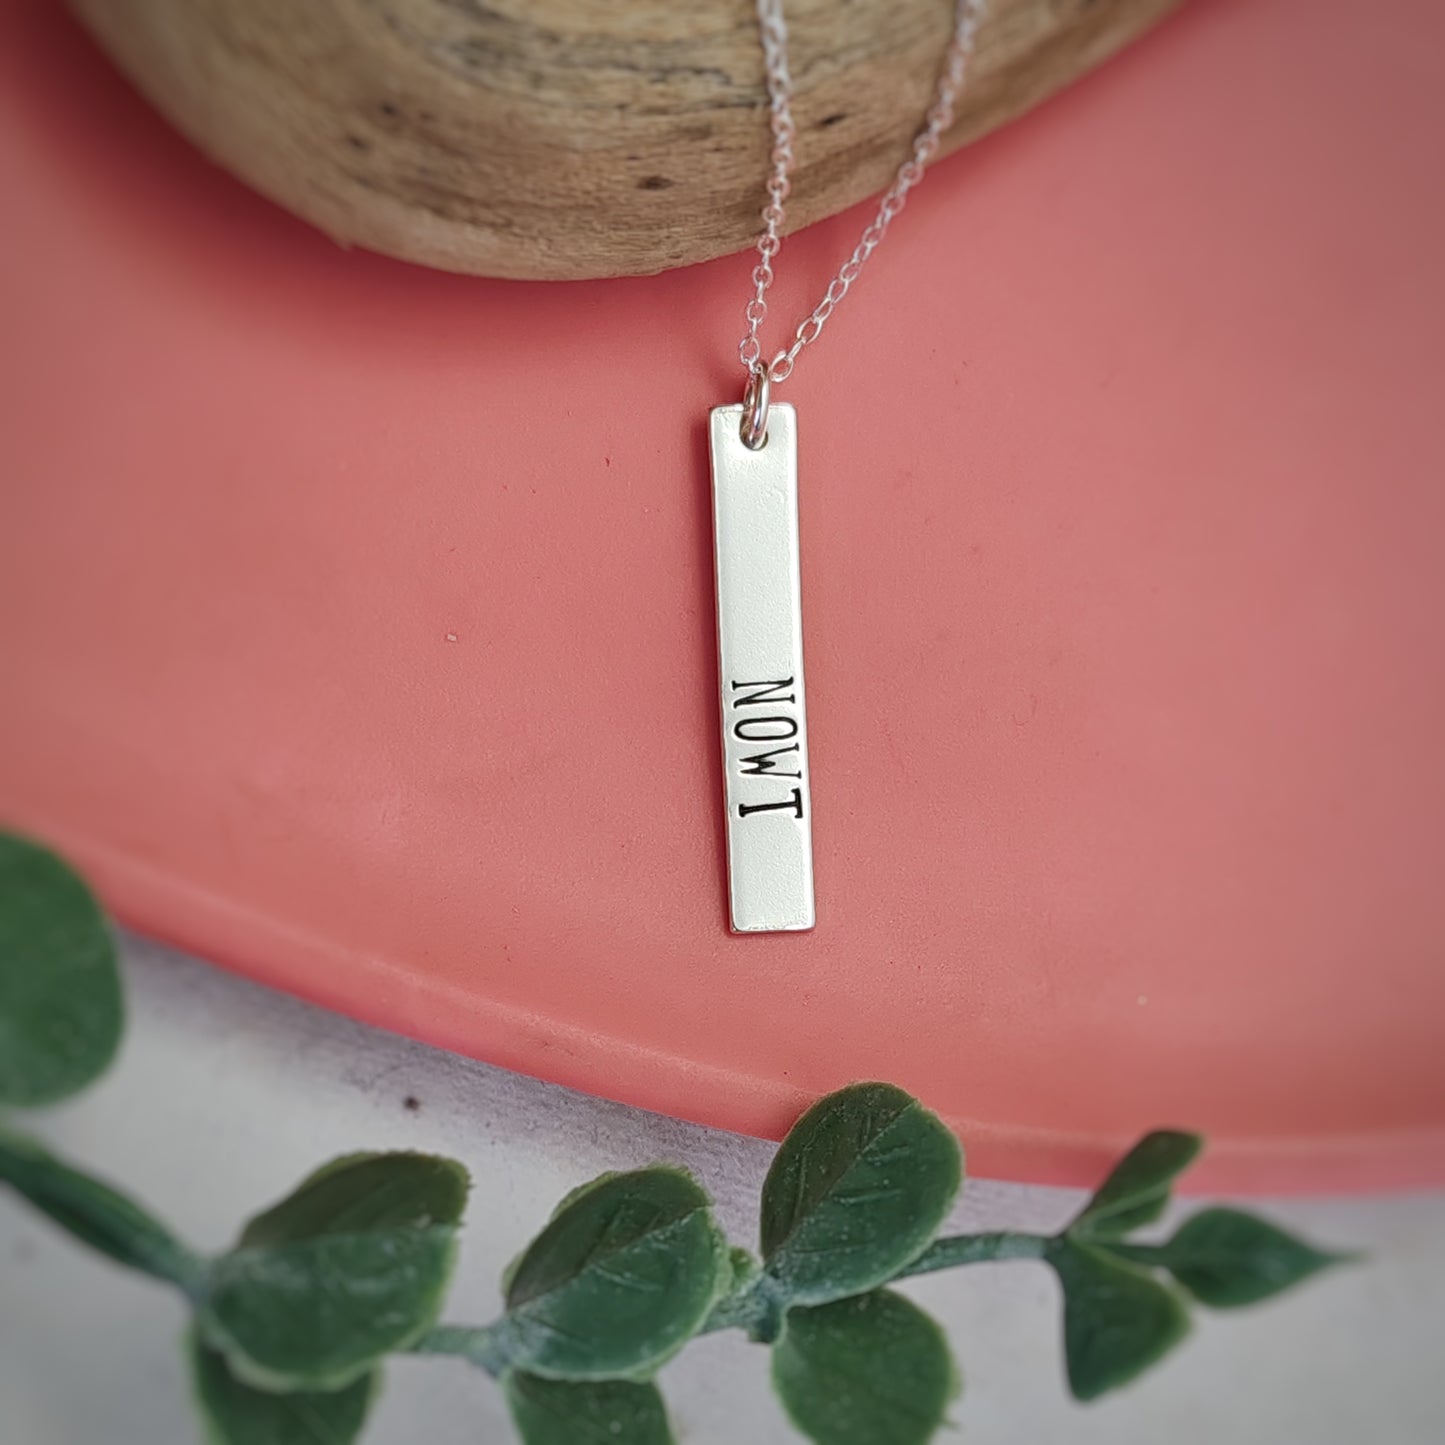 Yorkshire Sayings Necklace - Nowt